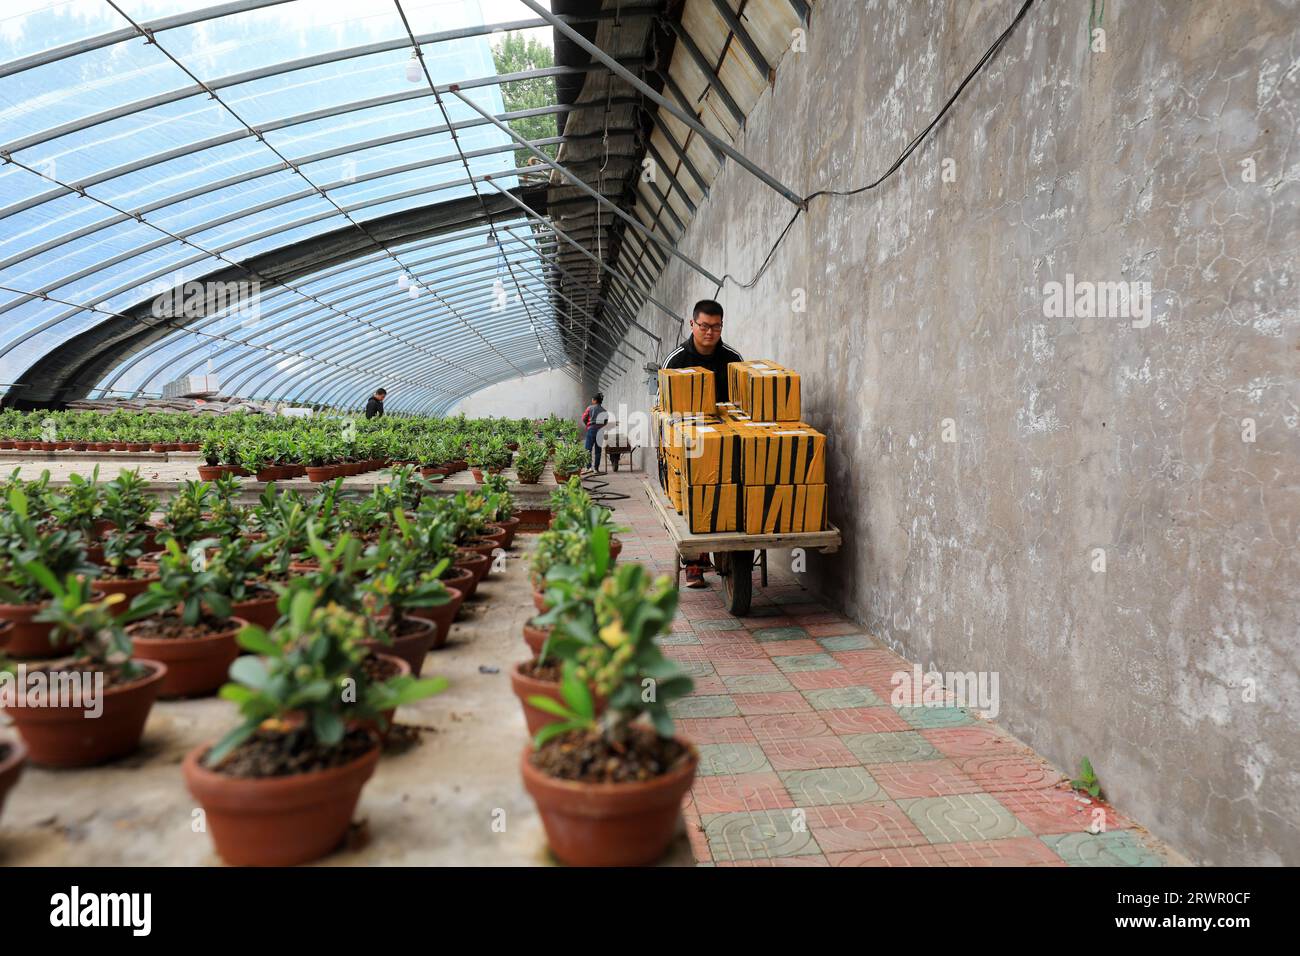 LUANNAN COUNTY, China - May 10, 2022: The gardener is carrying the packing box of Pyracantha bonsai in a nursery, North China Stock Photo